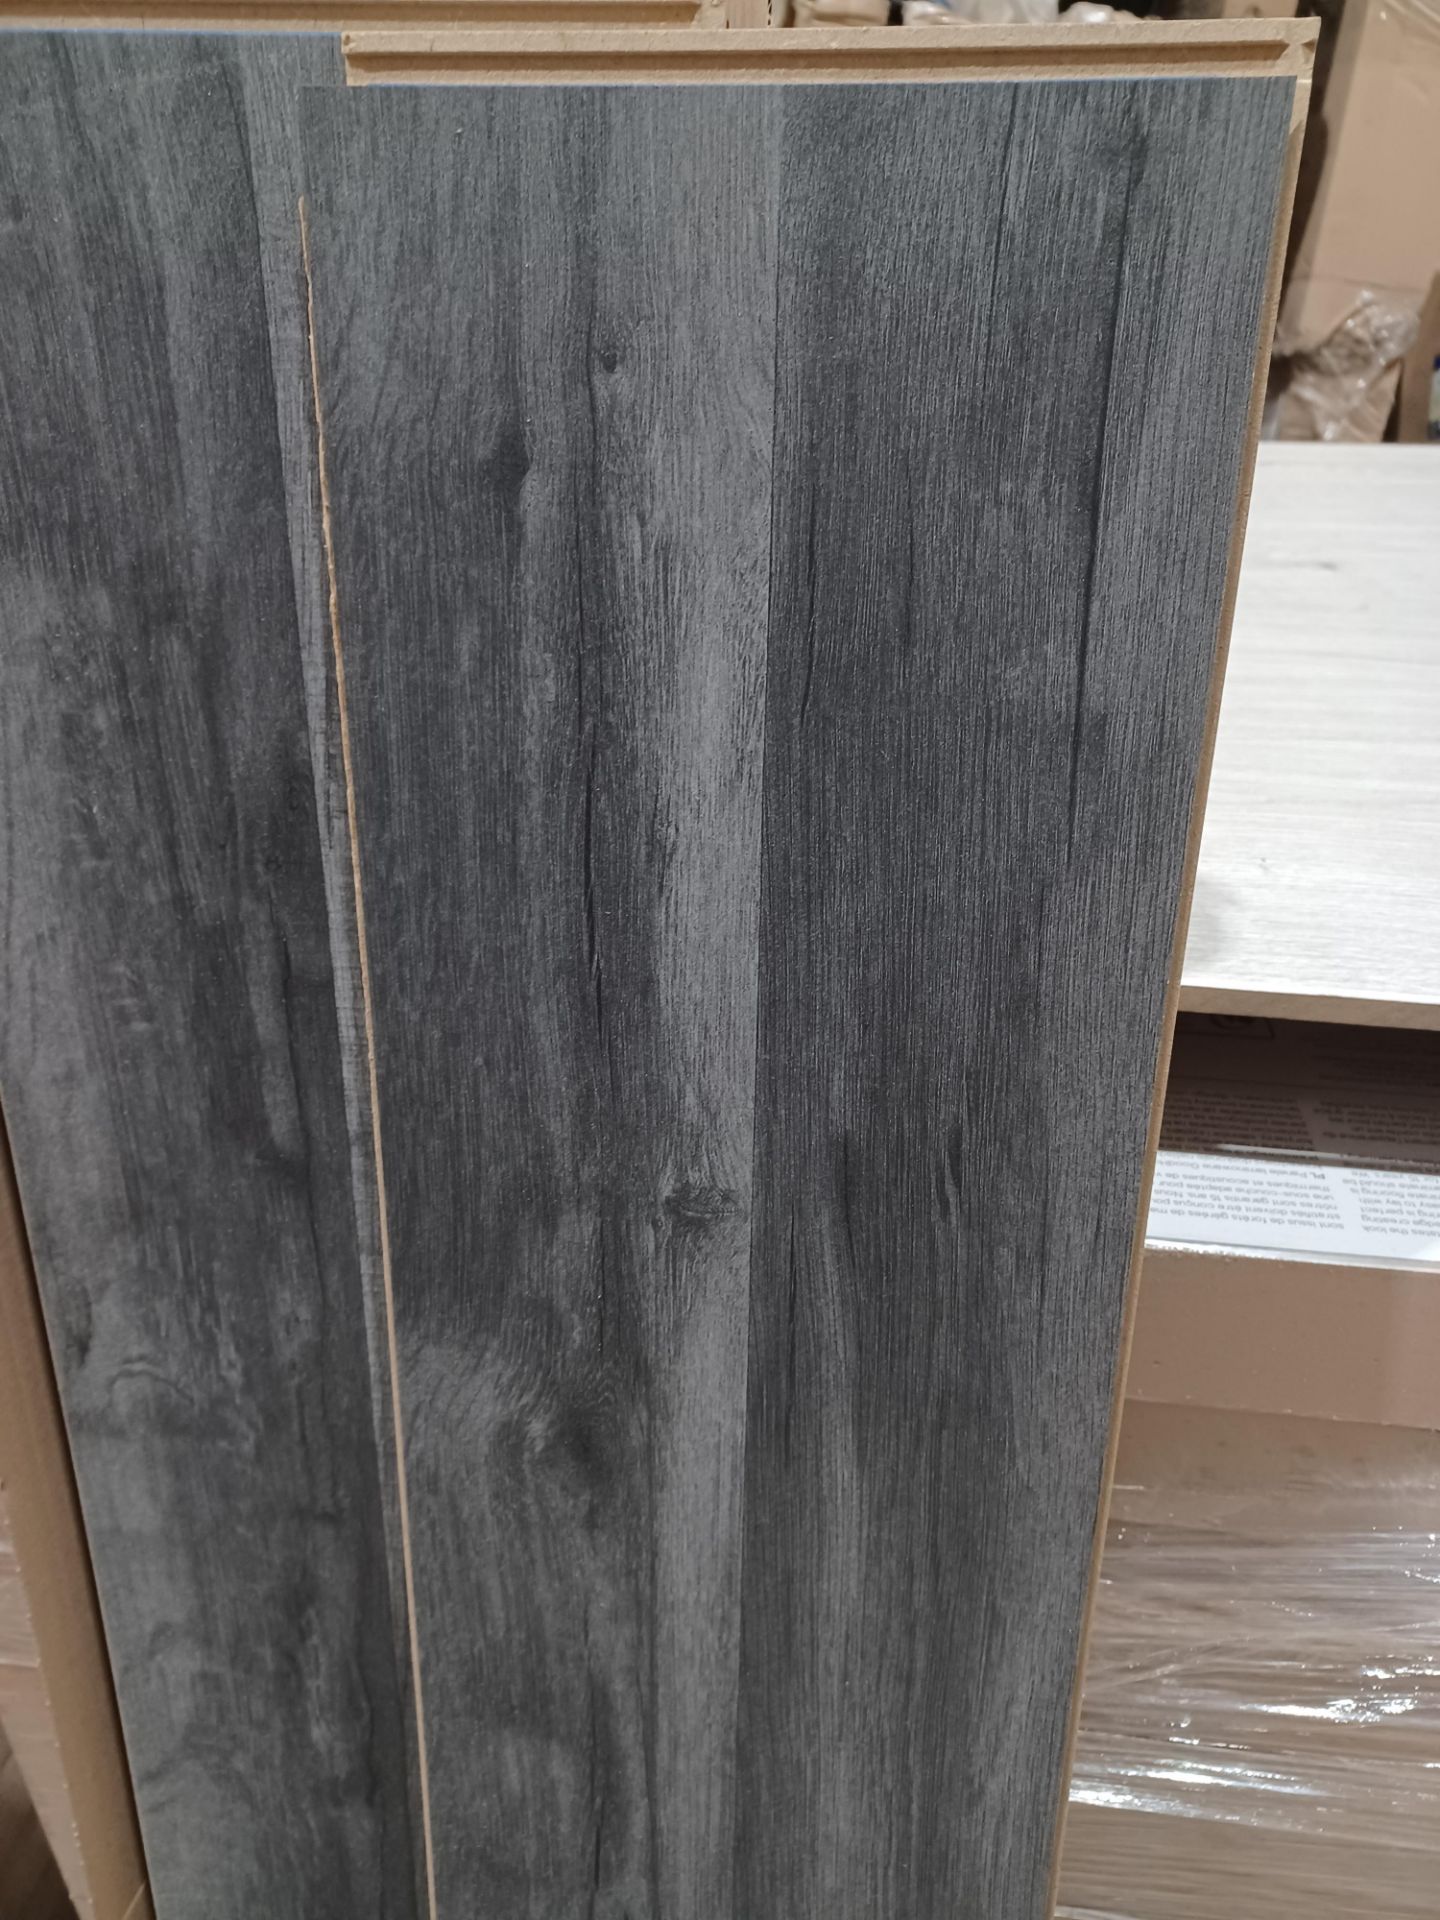 PALLET TO CONTAIN 16 X PACKS OF BAIRNSDALE DARK GREY WOOD LAMINATE FLOORING. EACH PACK CONTAINS 1. - Image 2 of 2